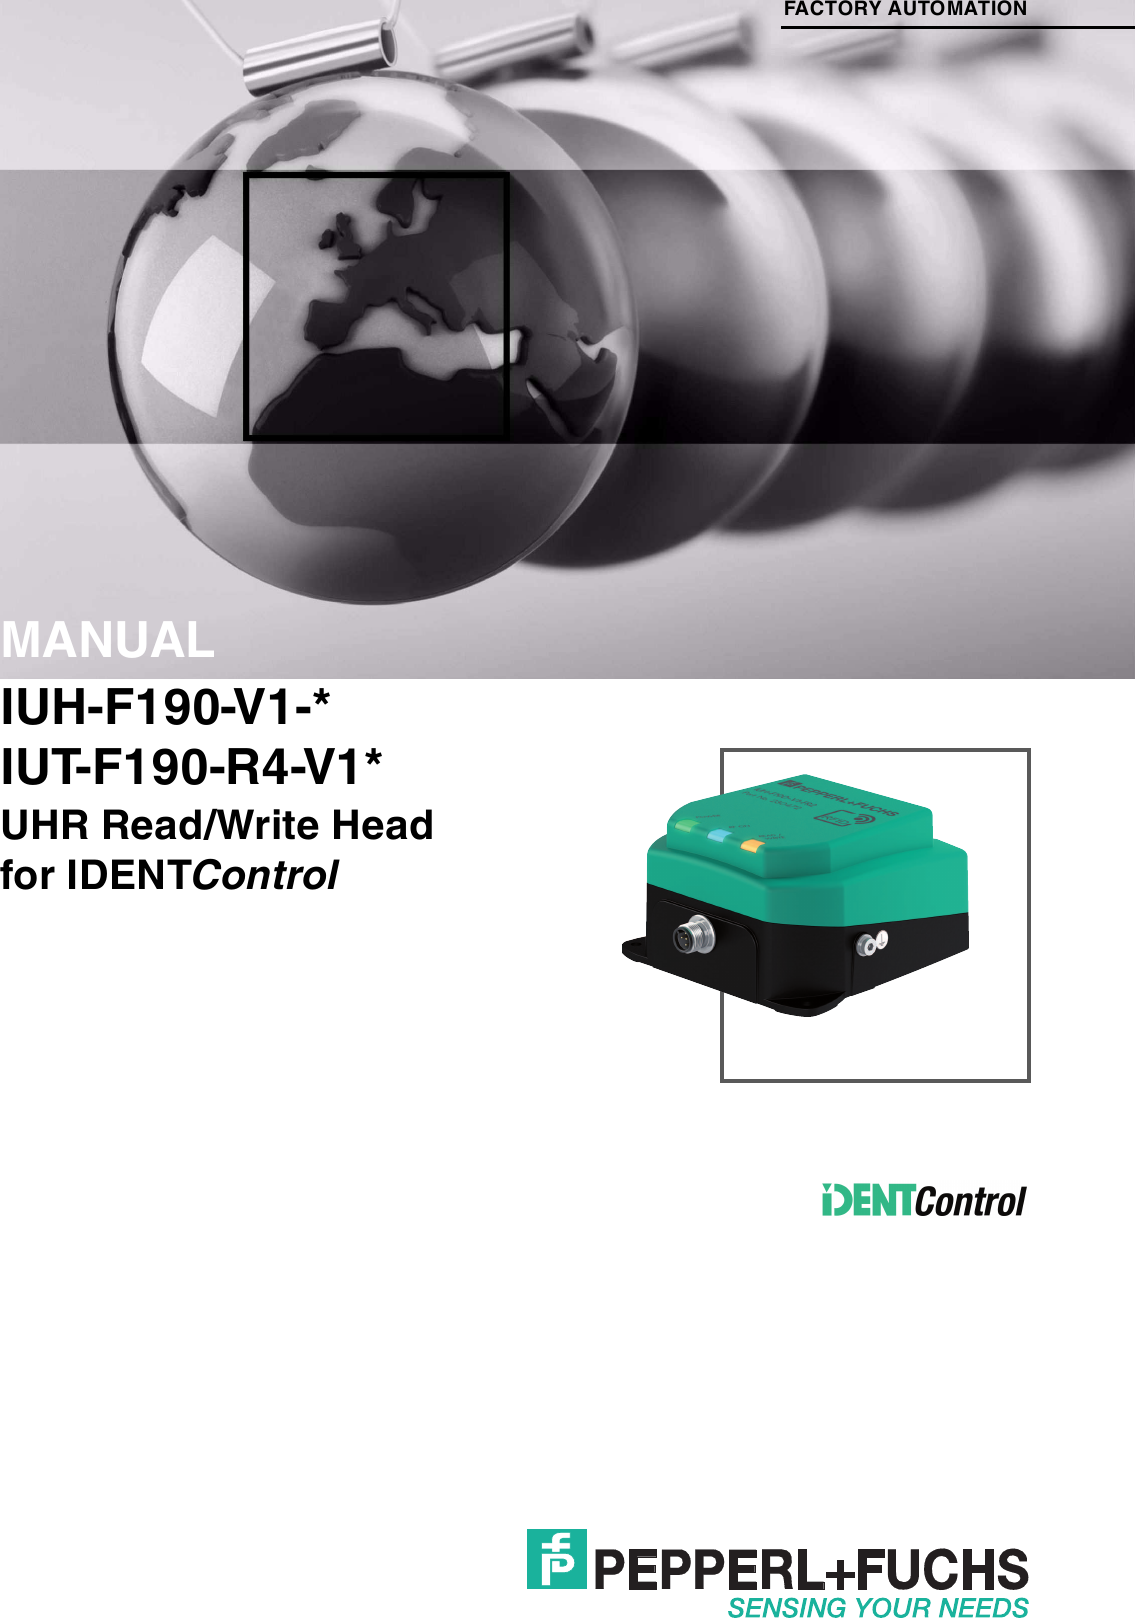 IUH-F190-V1-*IUT-F190-R4-V1*UHR Read/Write Head for IDENTControlFACTORY AUTOMATIONMANUAL